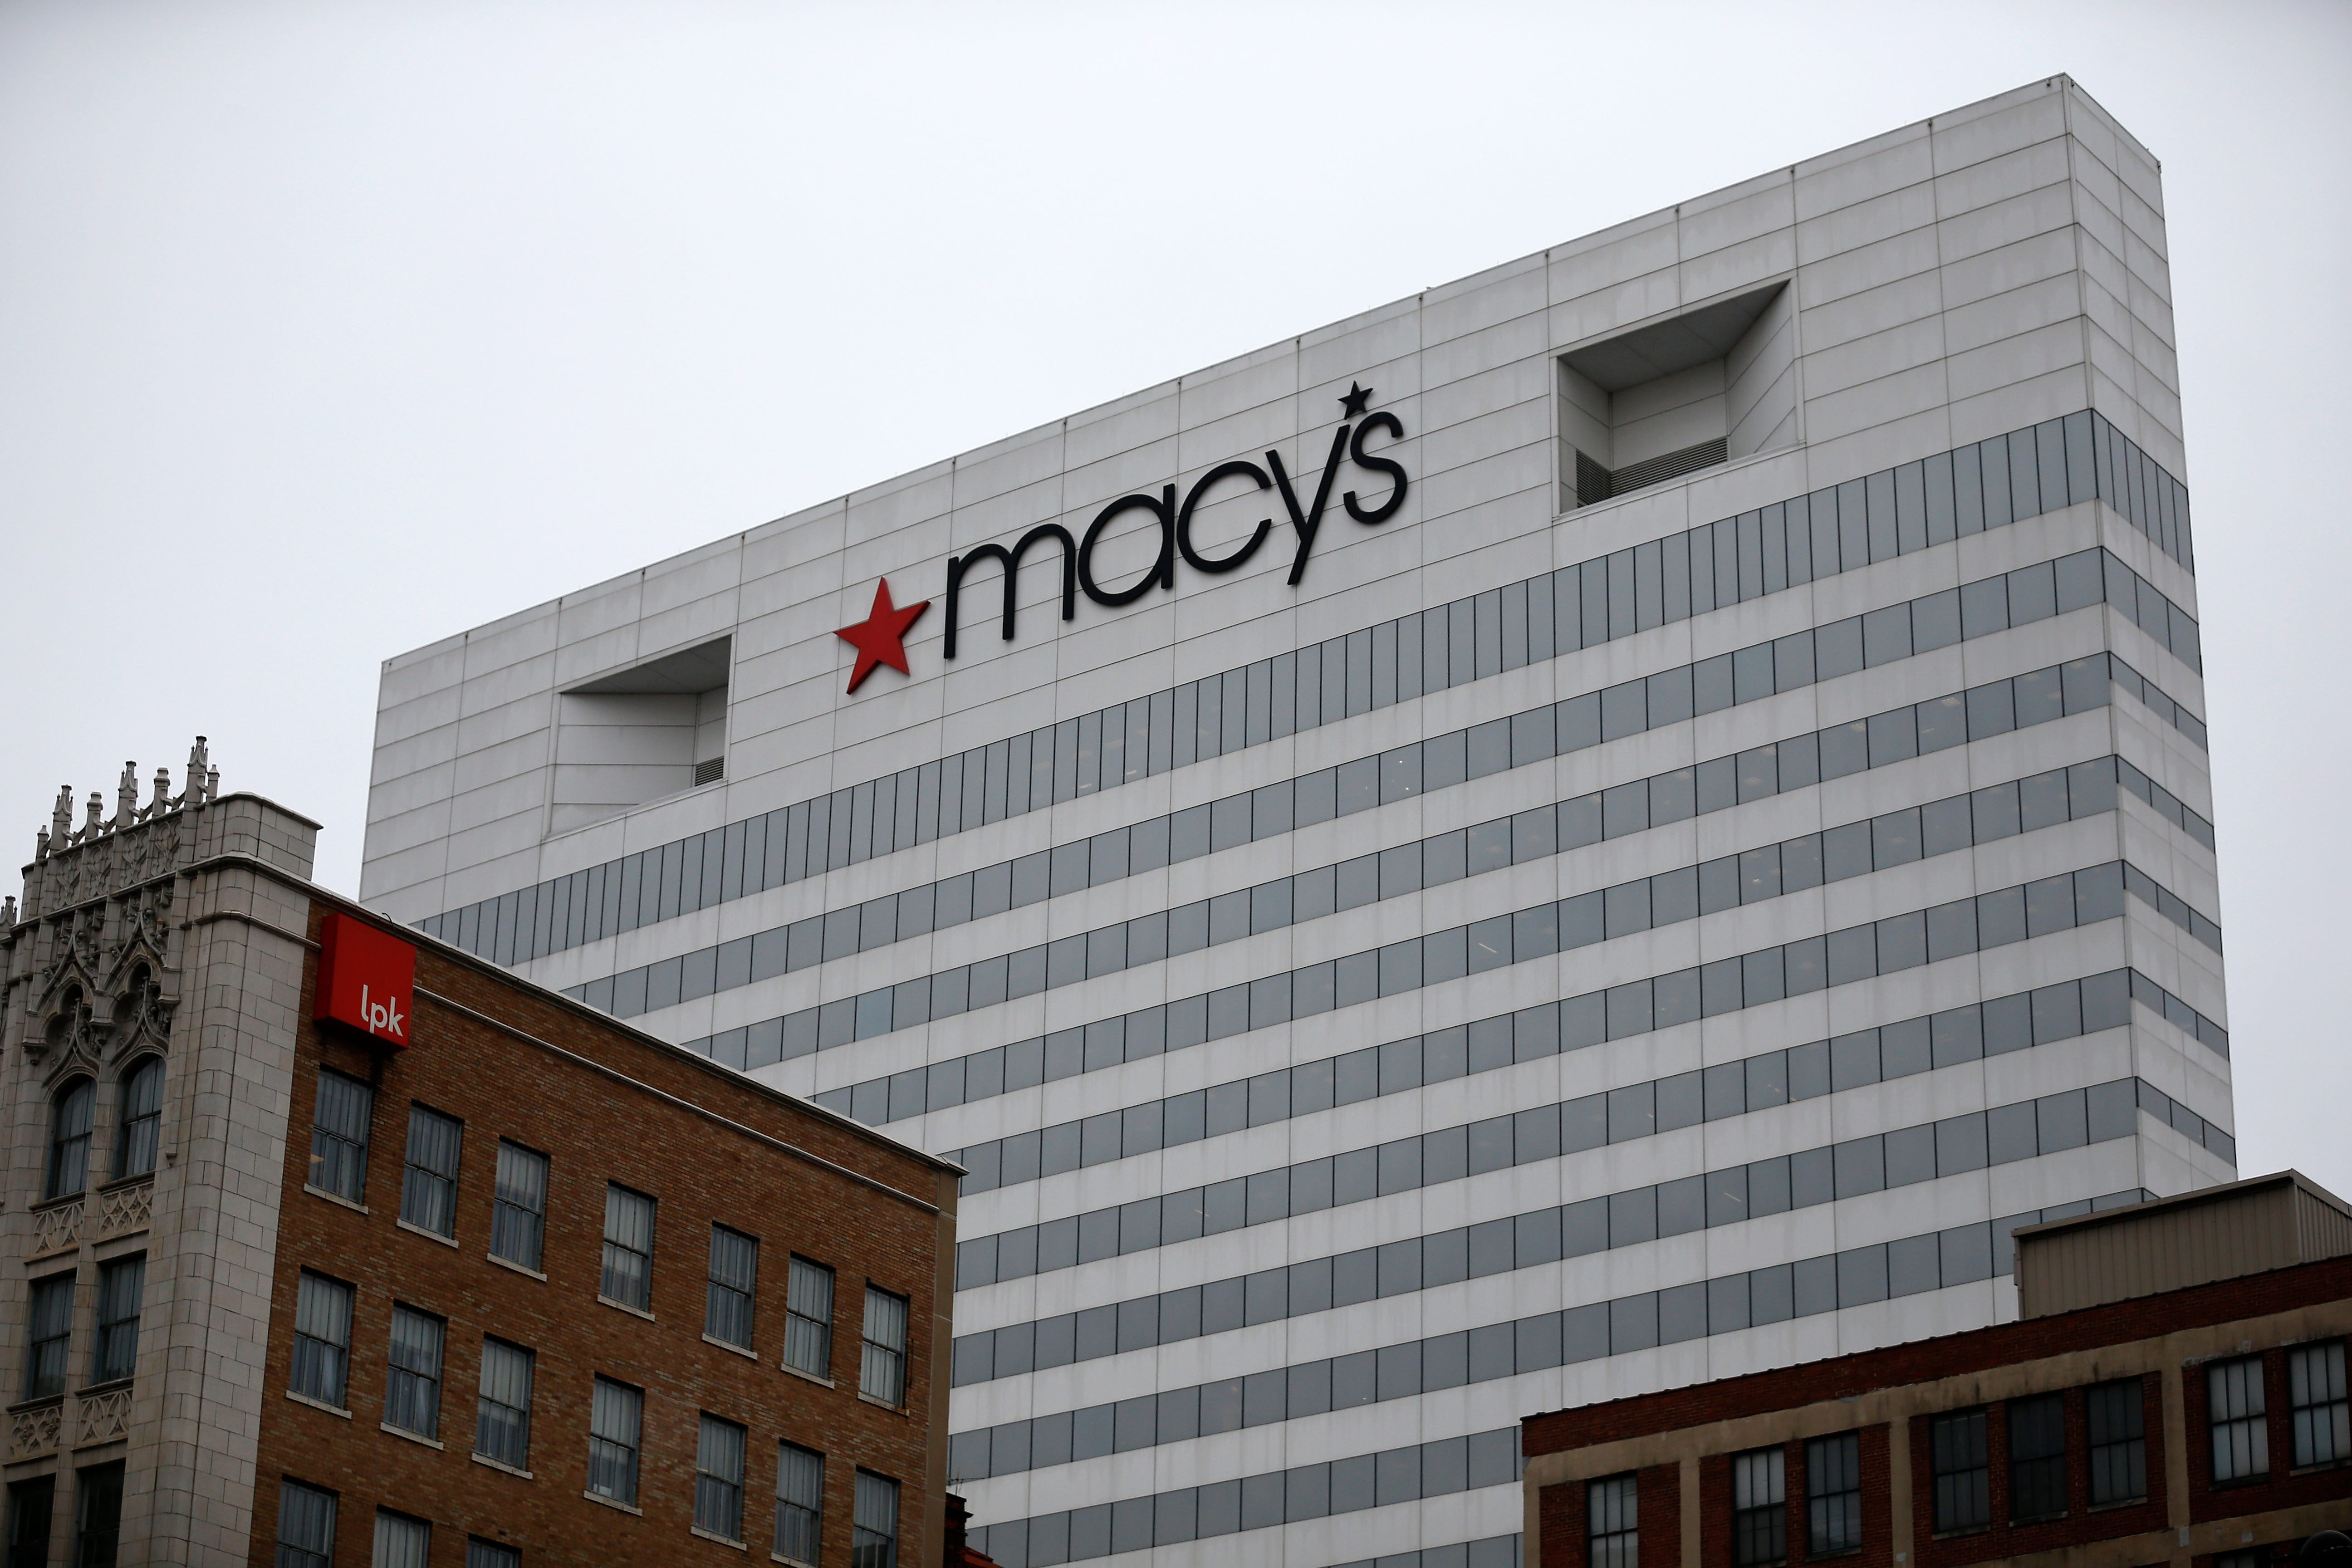 Will Macy's cash in on headquarters by selling the valuable real estate?